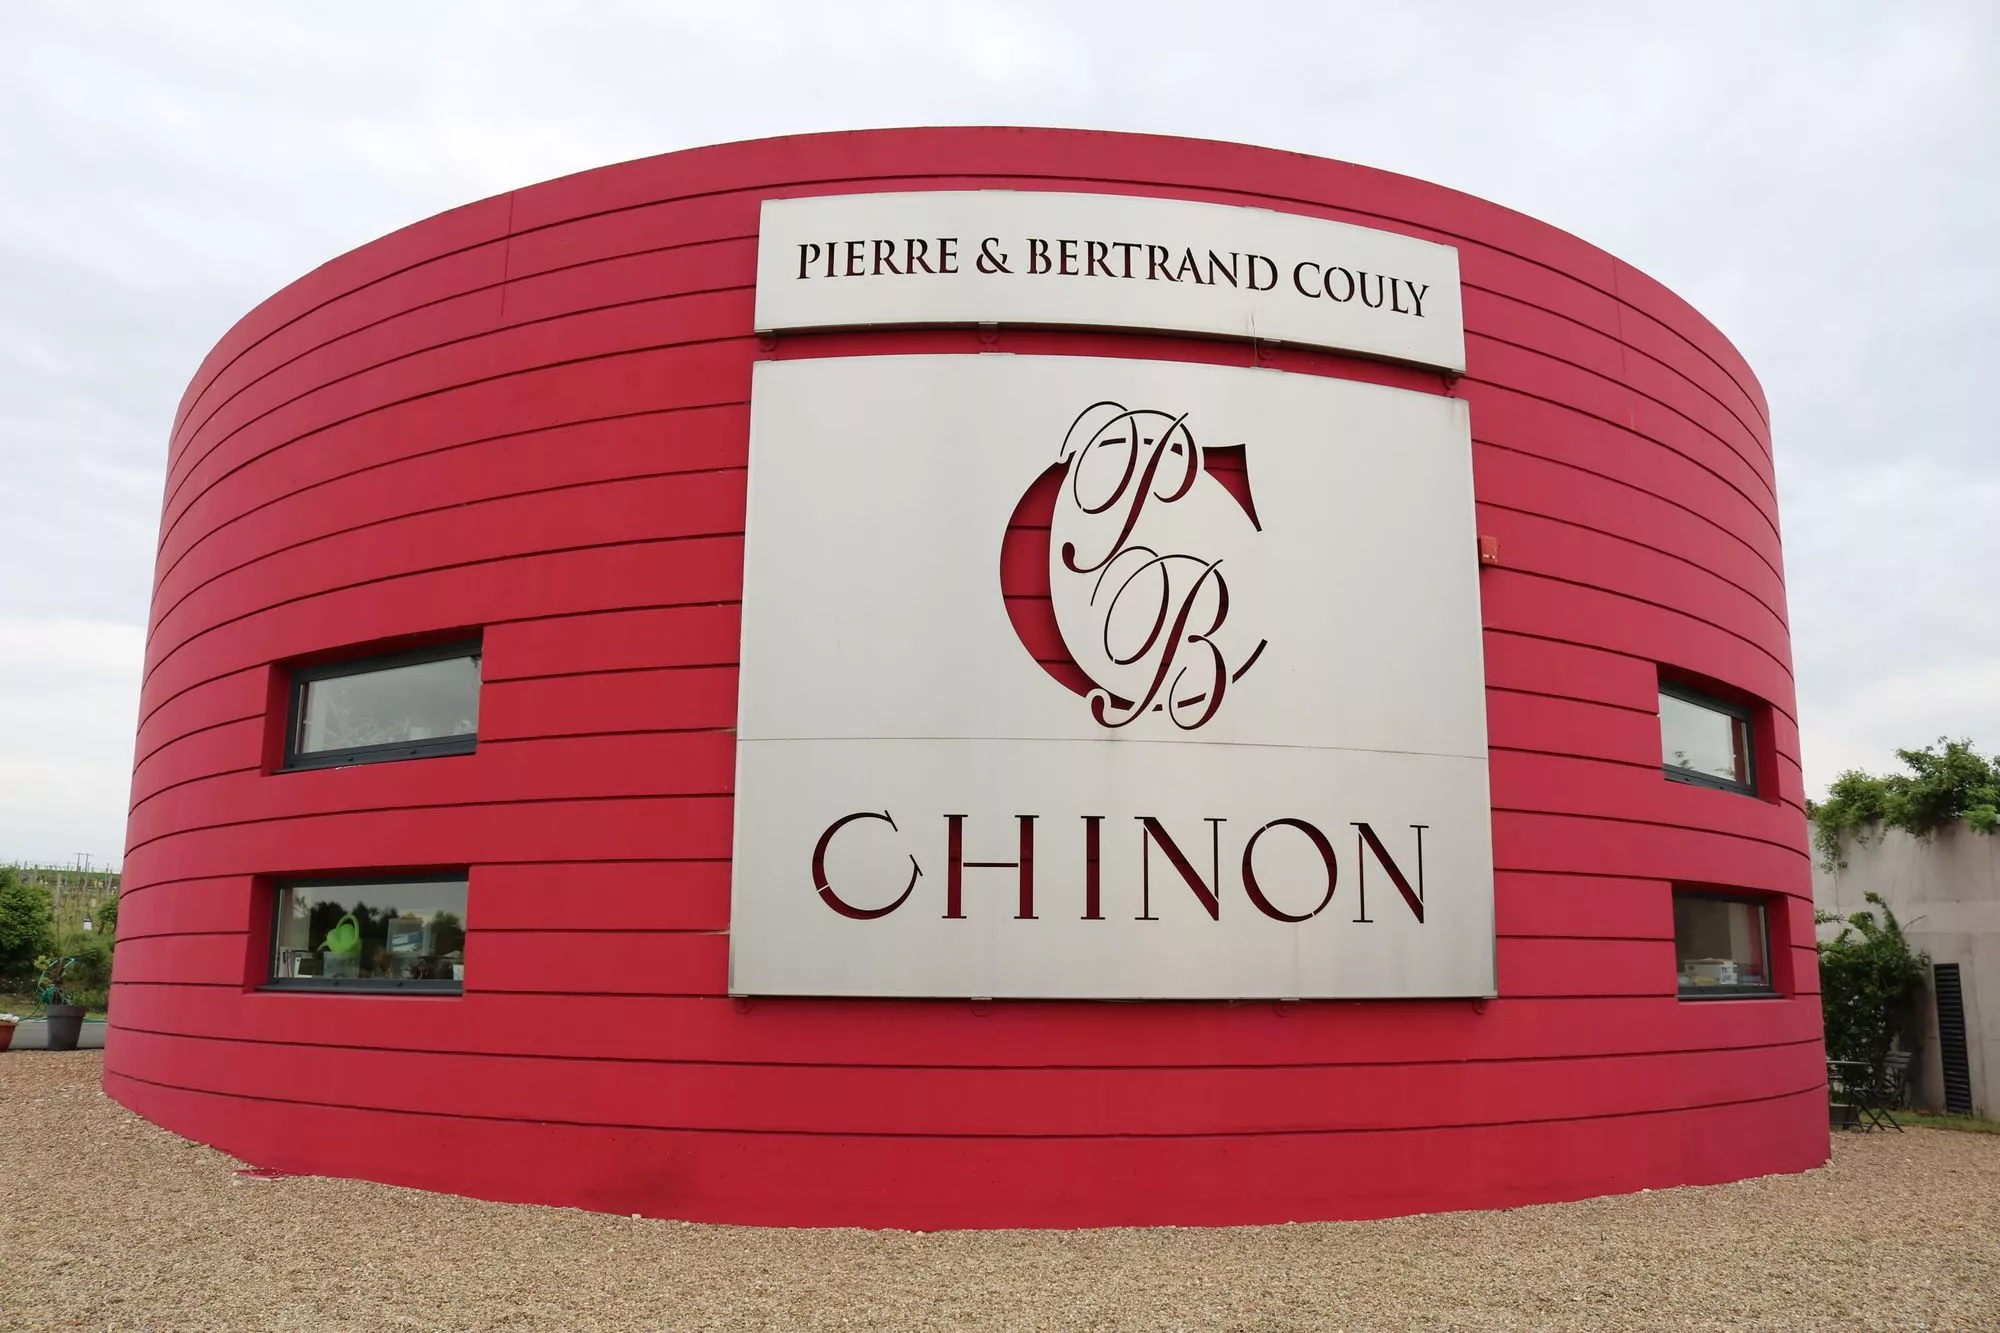 Pierre & Bertrand Couly Chinon in France, Europe | Wineries - Rated 0.8